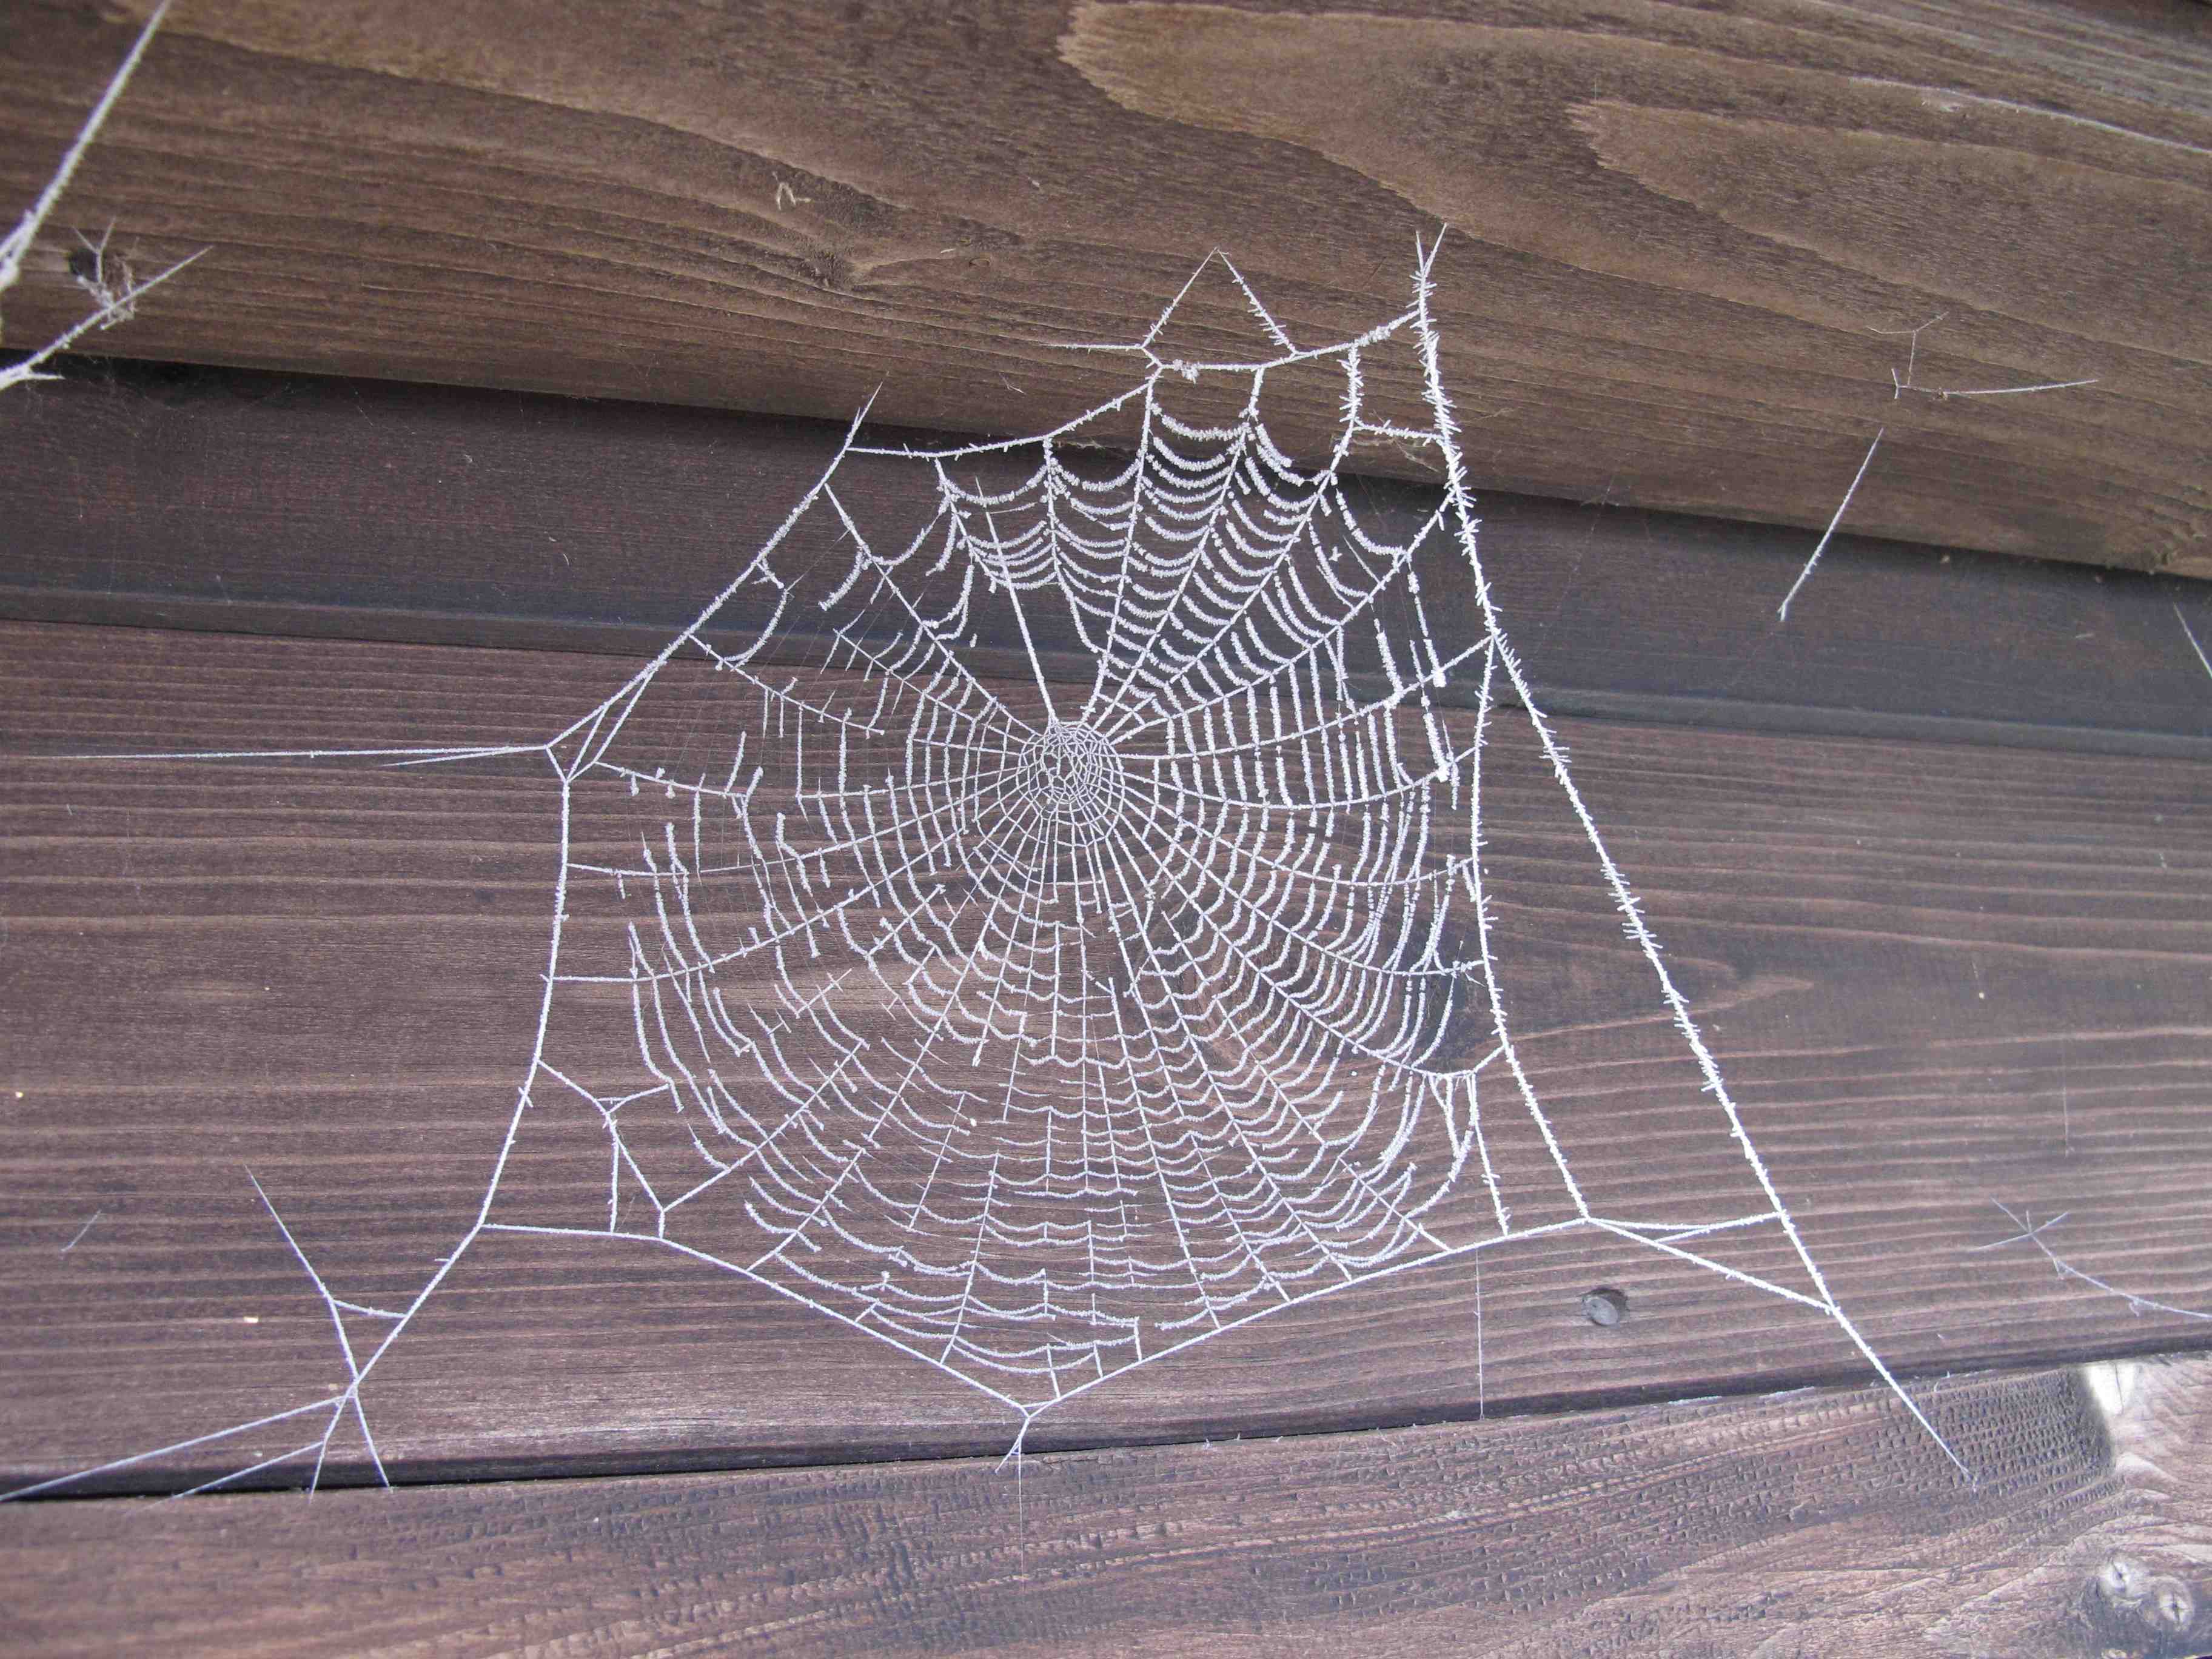 Morning frost on a spider's web